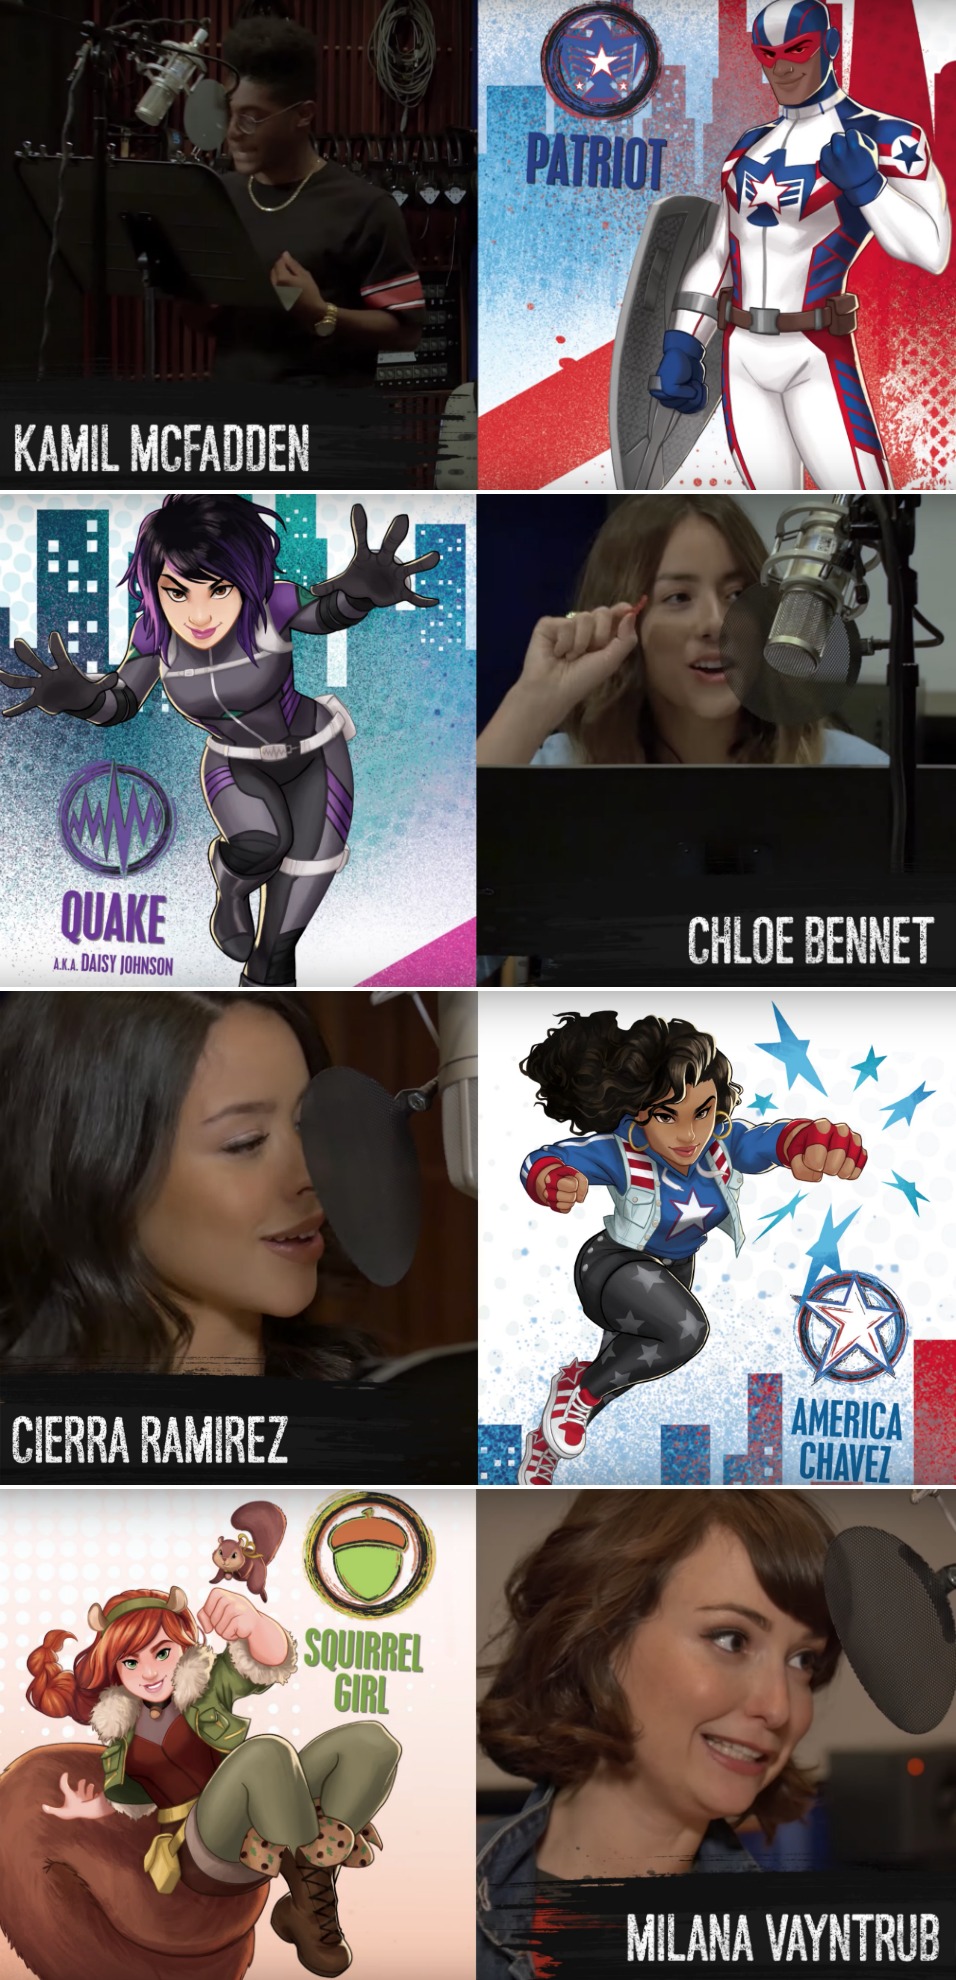 The cast of Marvel Rising: Secret Warriors: A cool, diverse group of superheroes to help more kids see themselves as their own heroes